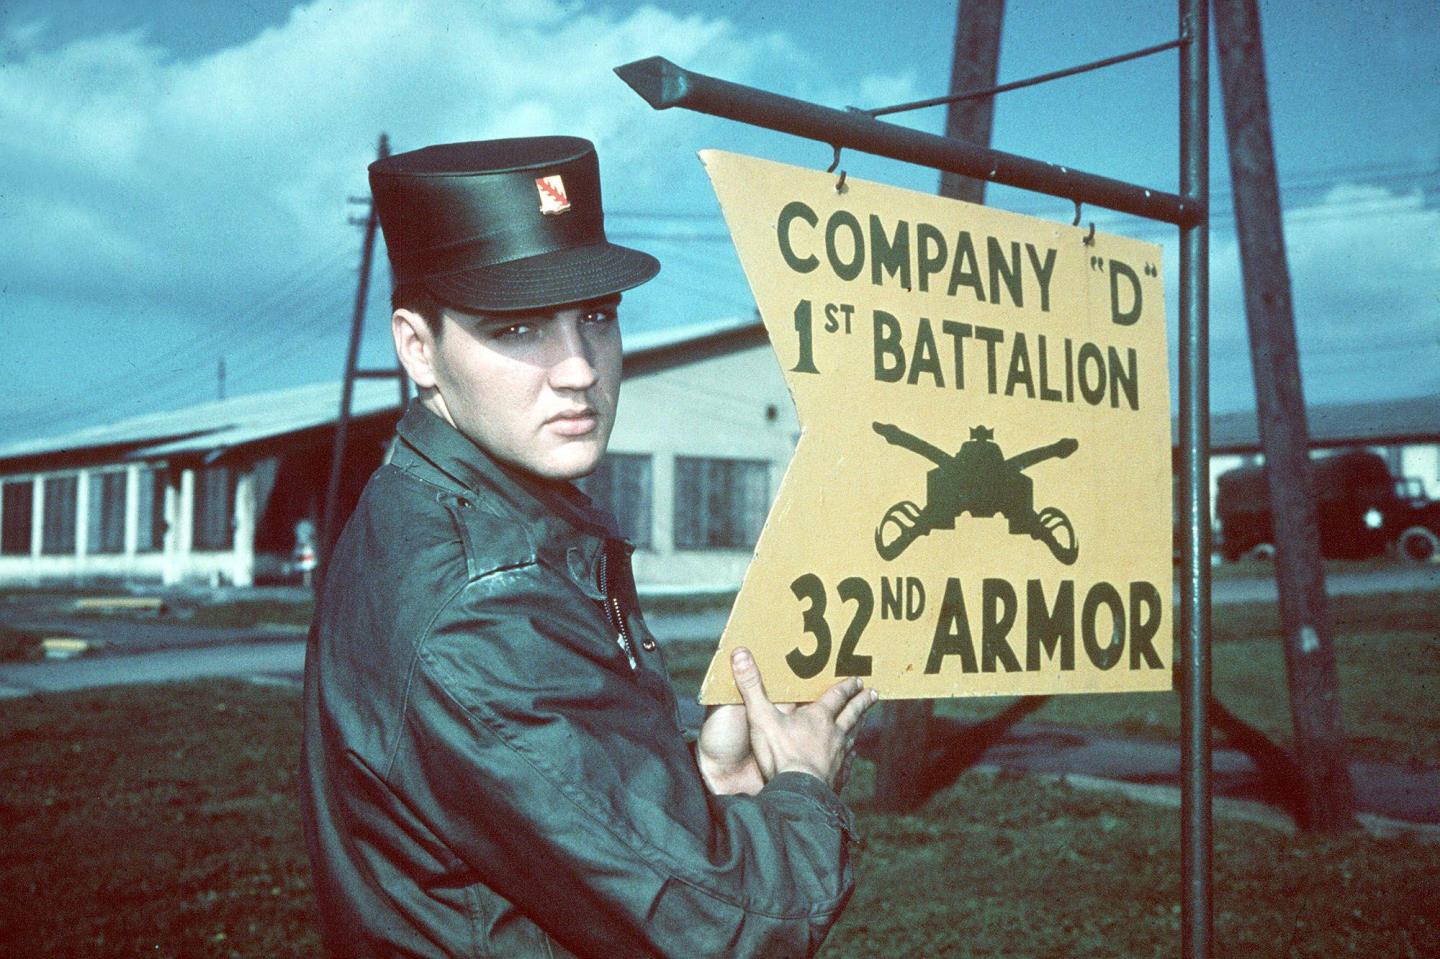 Elvis in Germany during his US Army days.